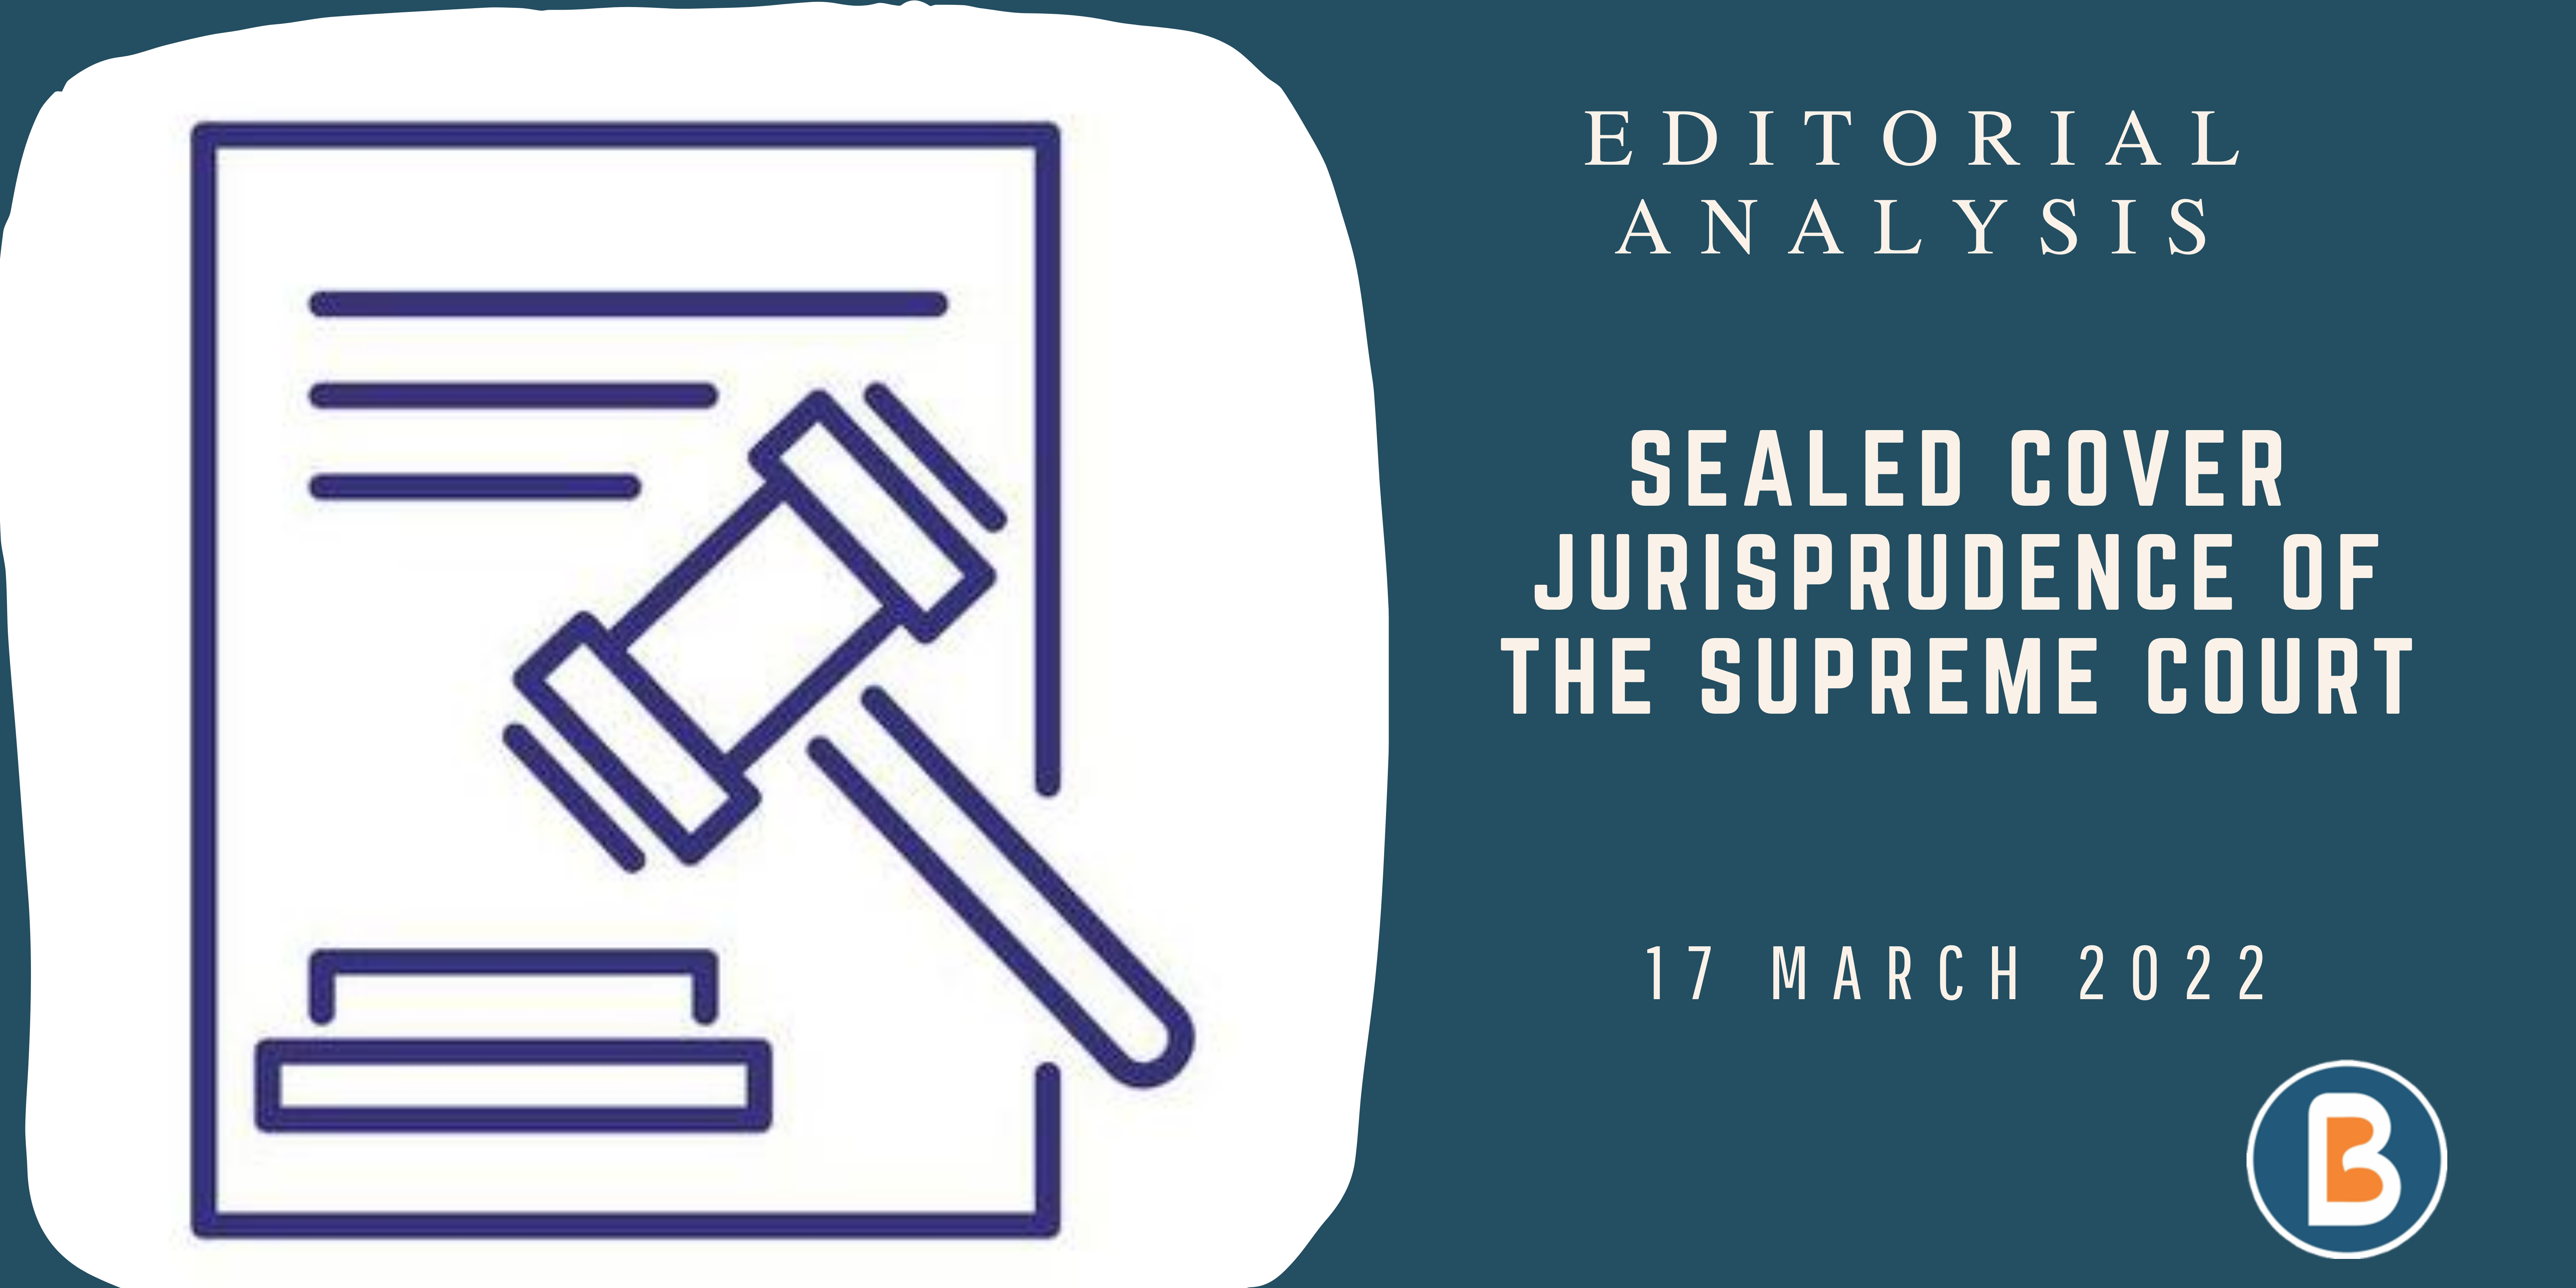 Editorial Analysis for UPSC - Sealed Cover Jurisprudence of the Supreme Court